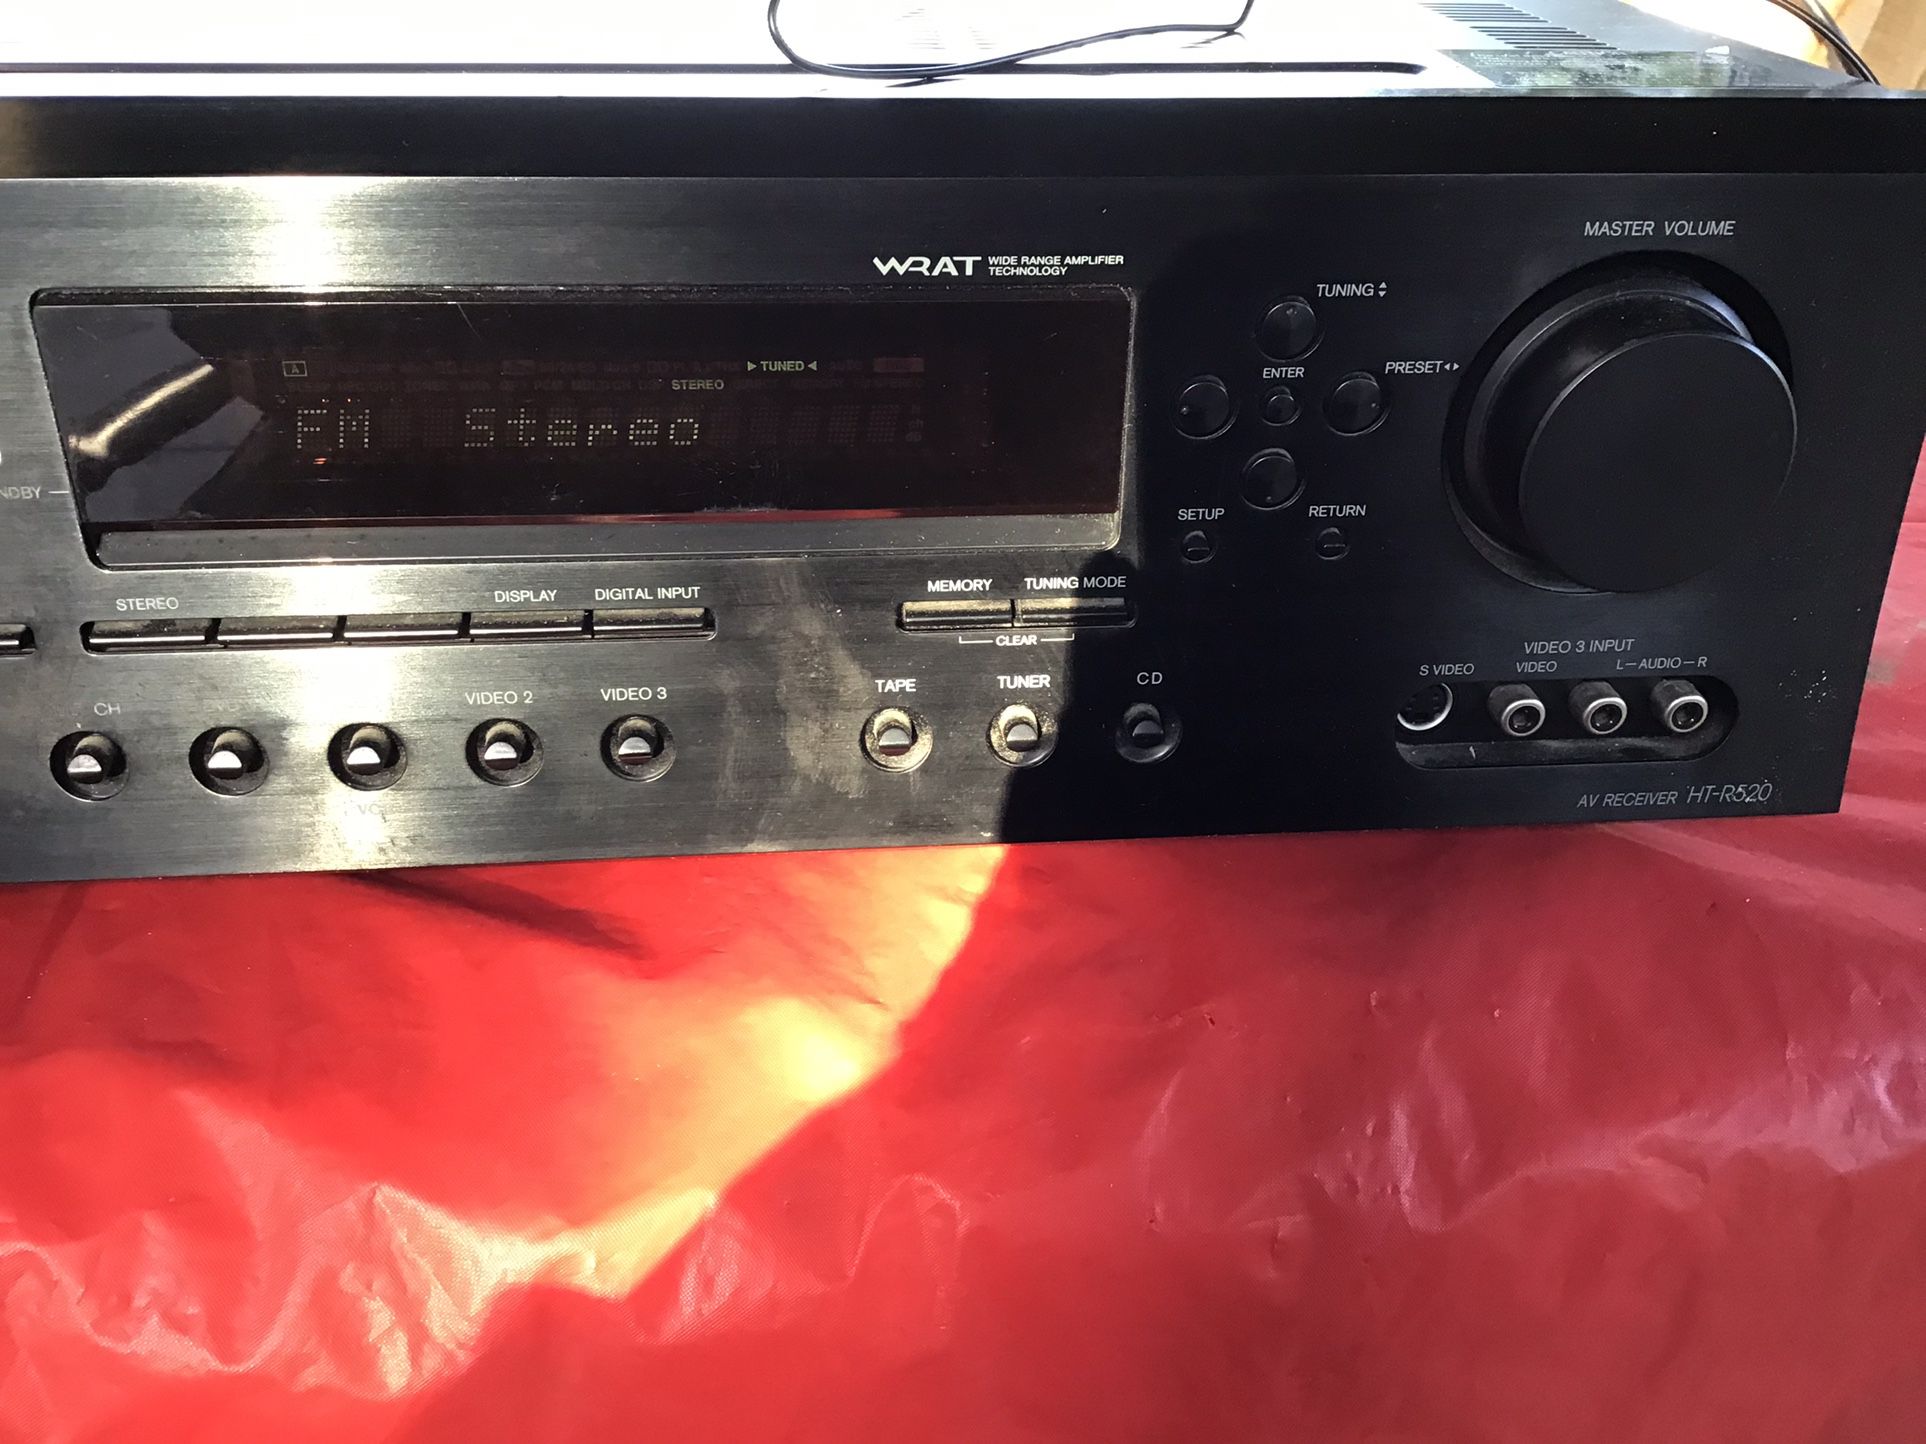 Onkyo HT-R520 Previously on tested a FM black Vintage Video one and two DVD cd output 